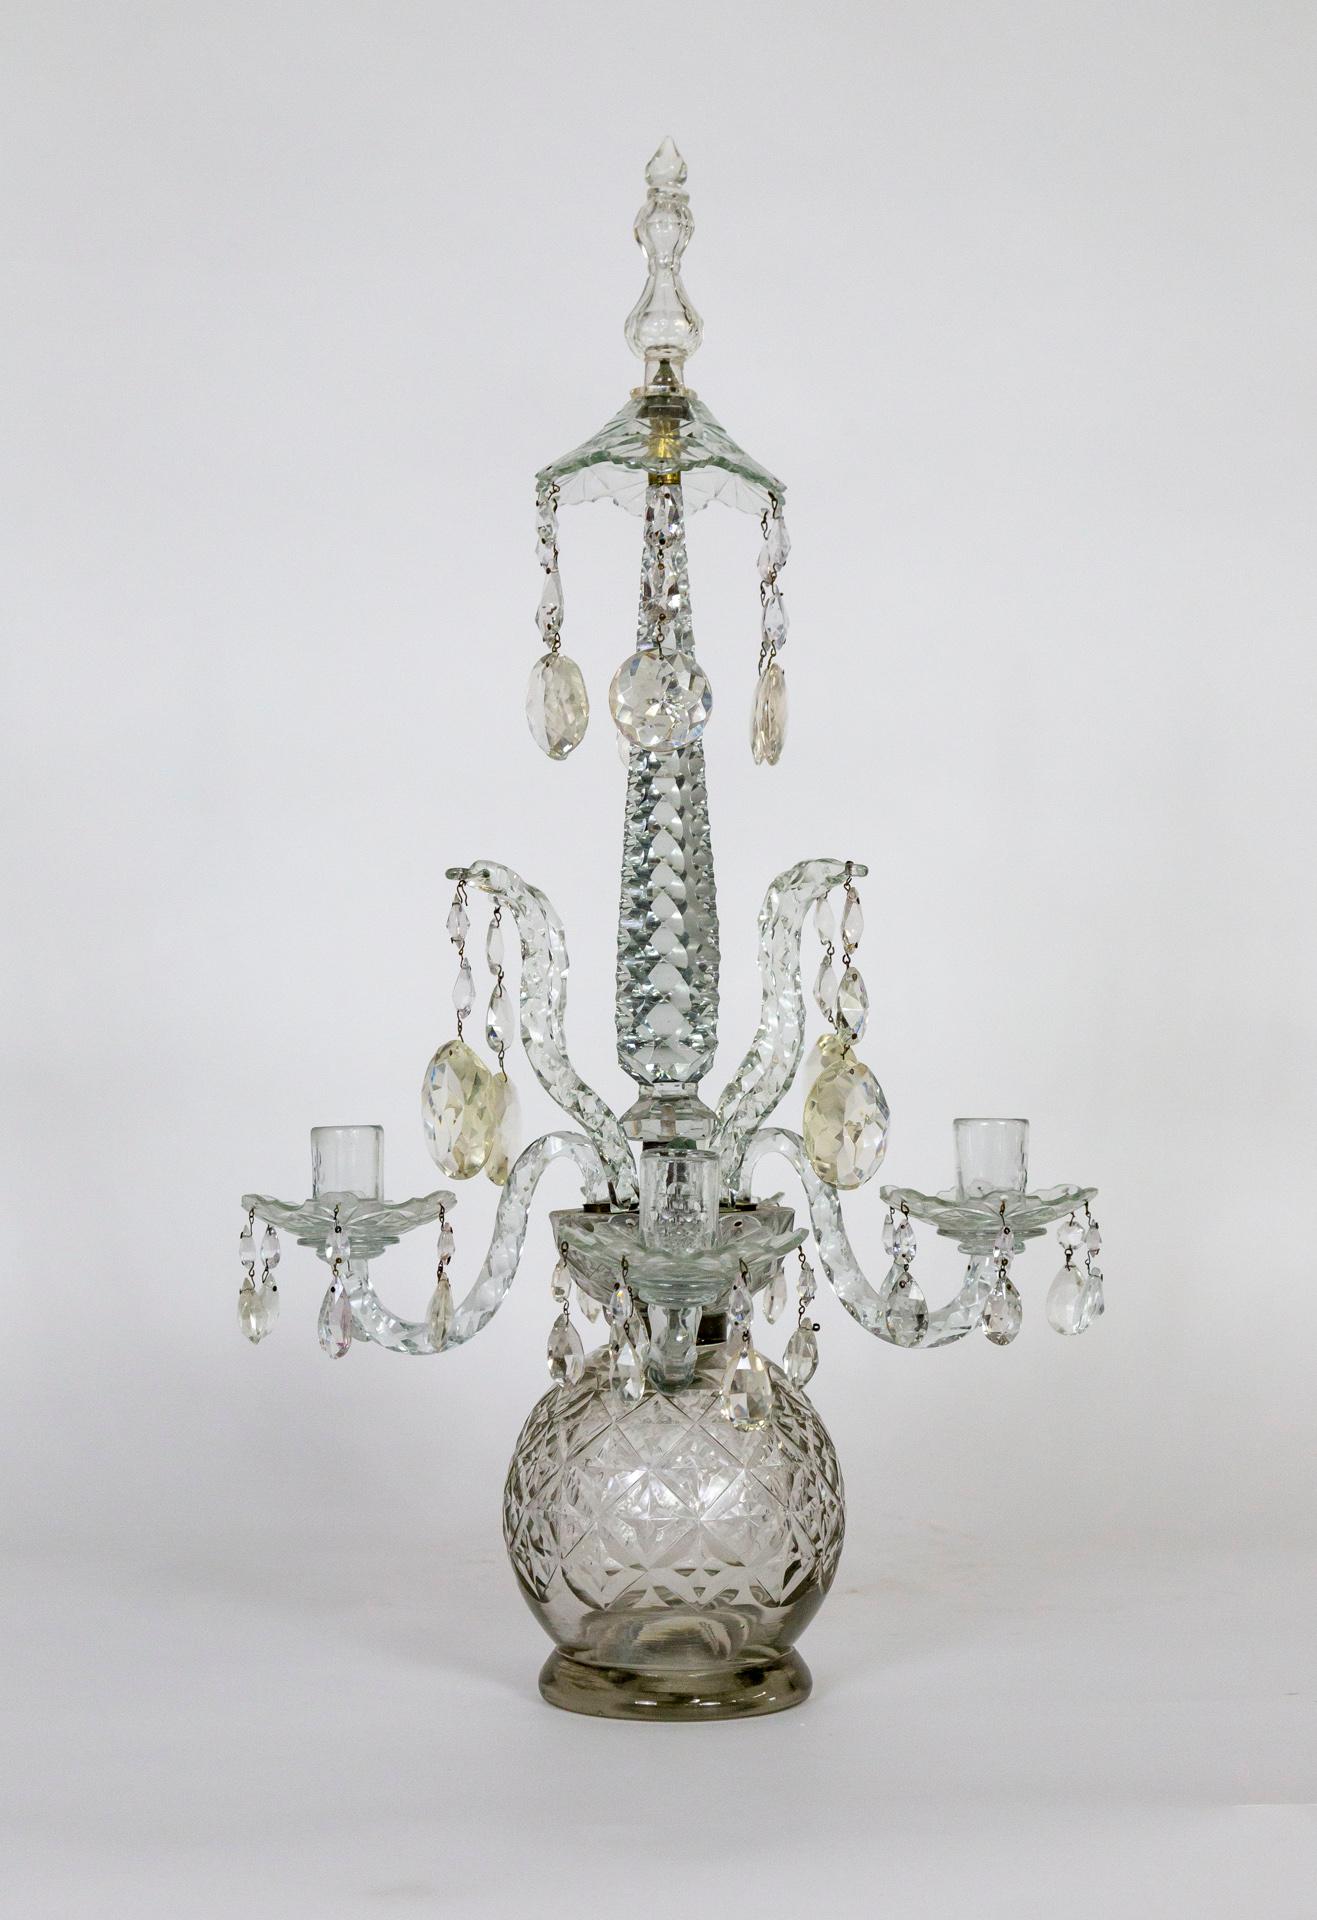 This large, ornate, tabletop candelabra holds 4 candles and is a stunning work of art with or without them. From 19th century Ireland in Henry III style; and made entirely of cut crystal with a large sphere base under a bowl mount with four snakes